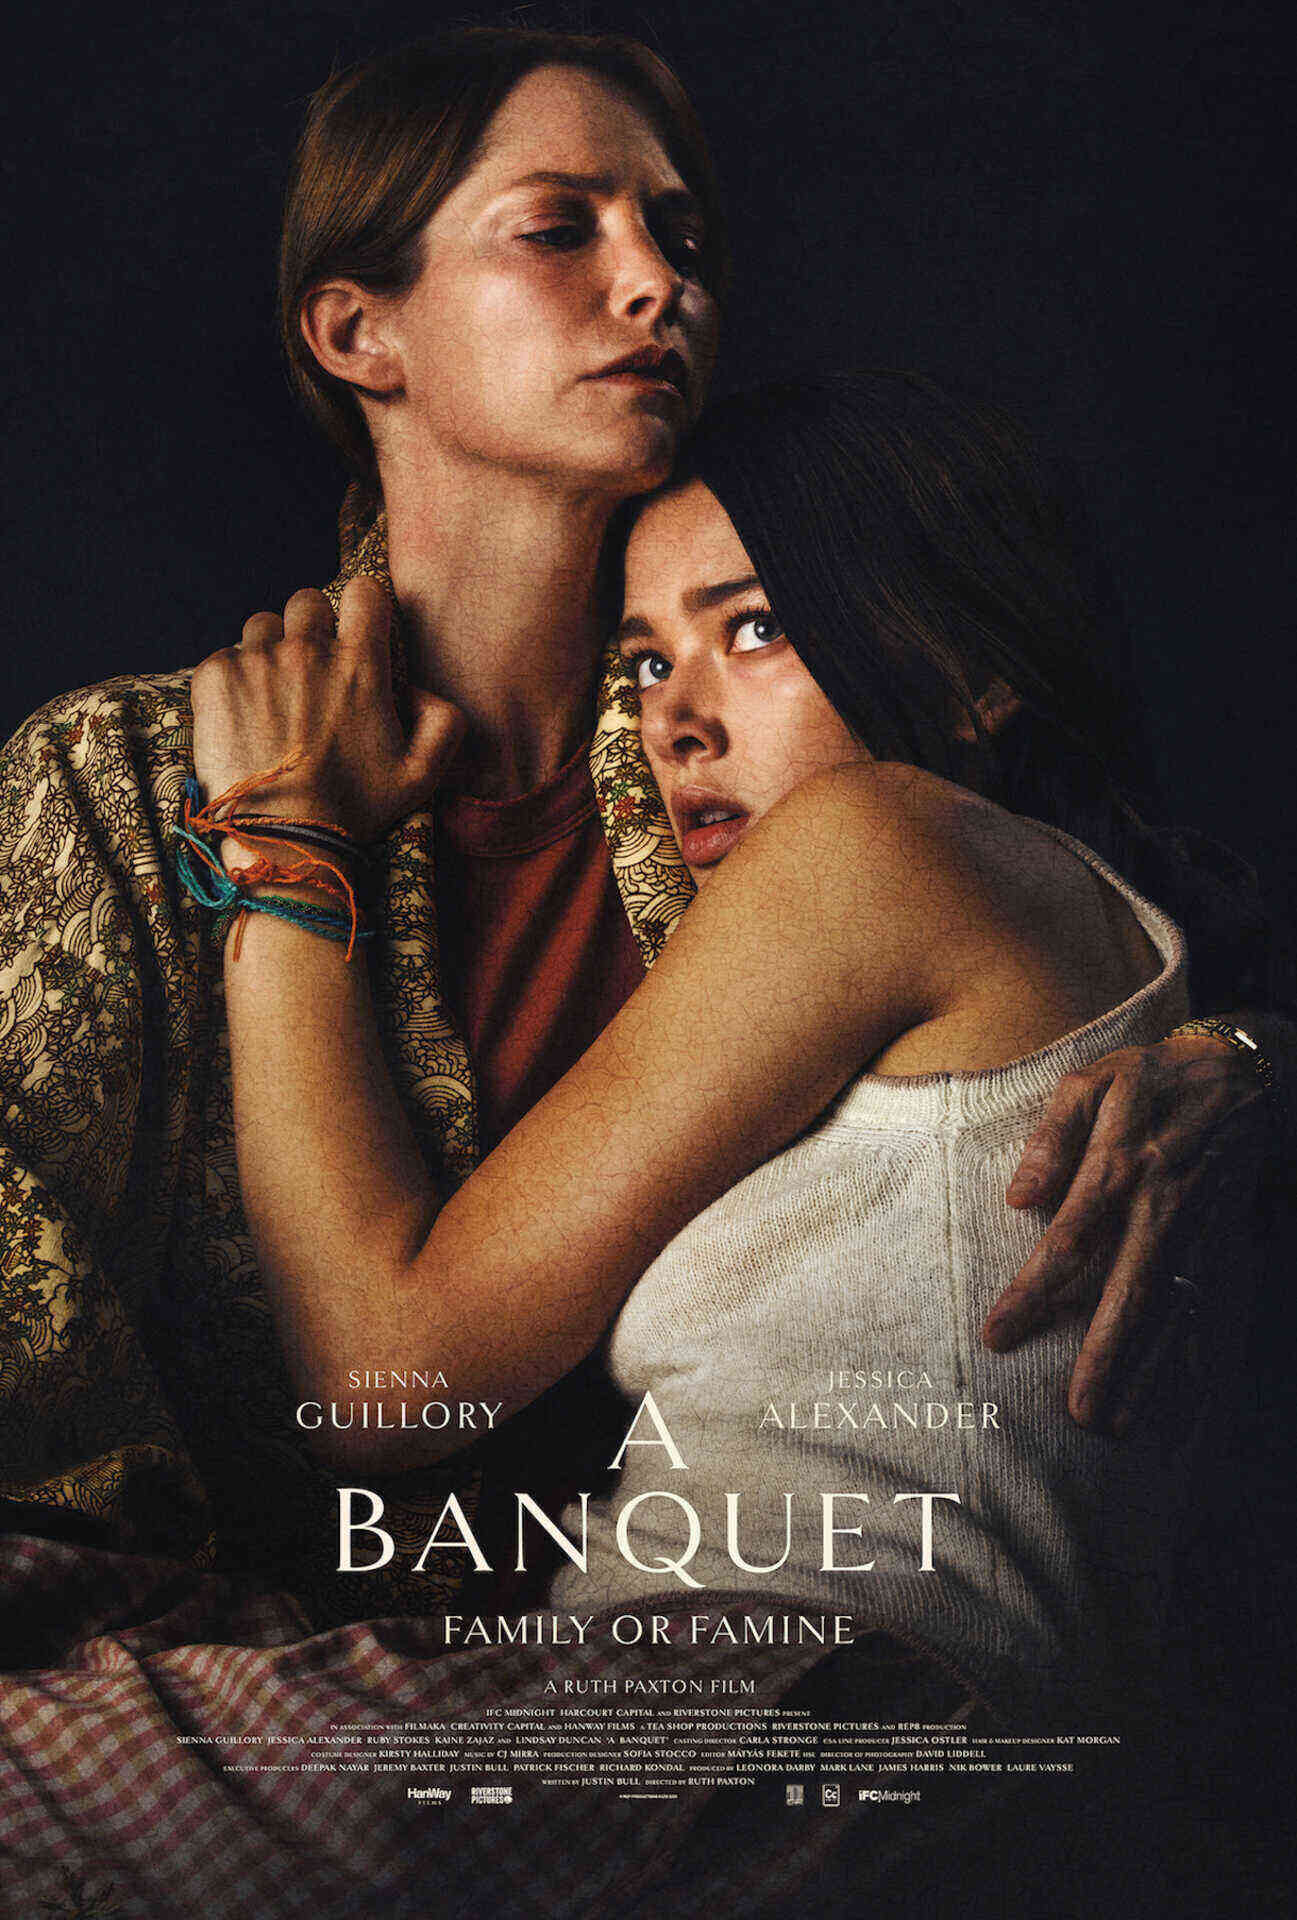 Theatrical poster for A Banquet, directed by Ruth Paxton.